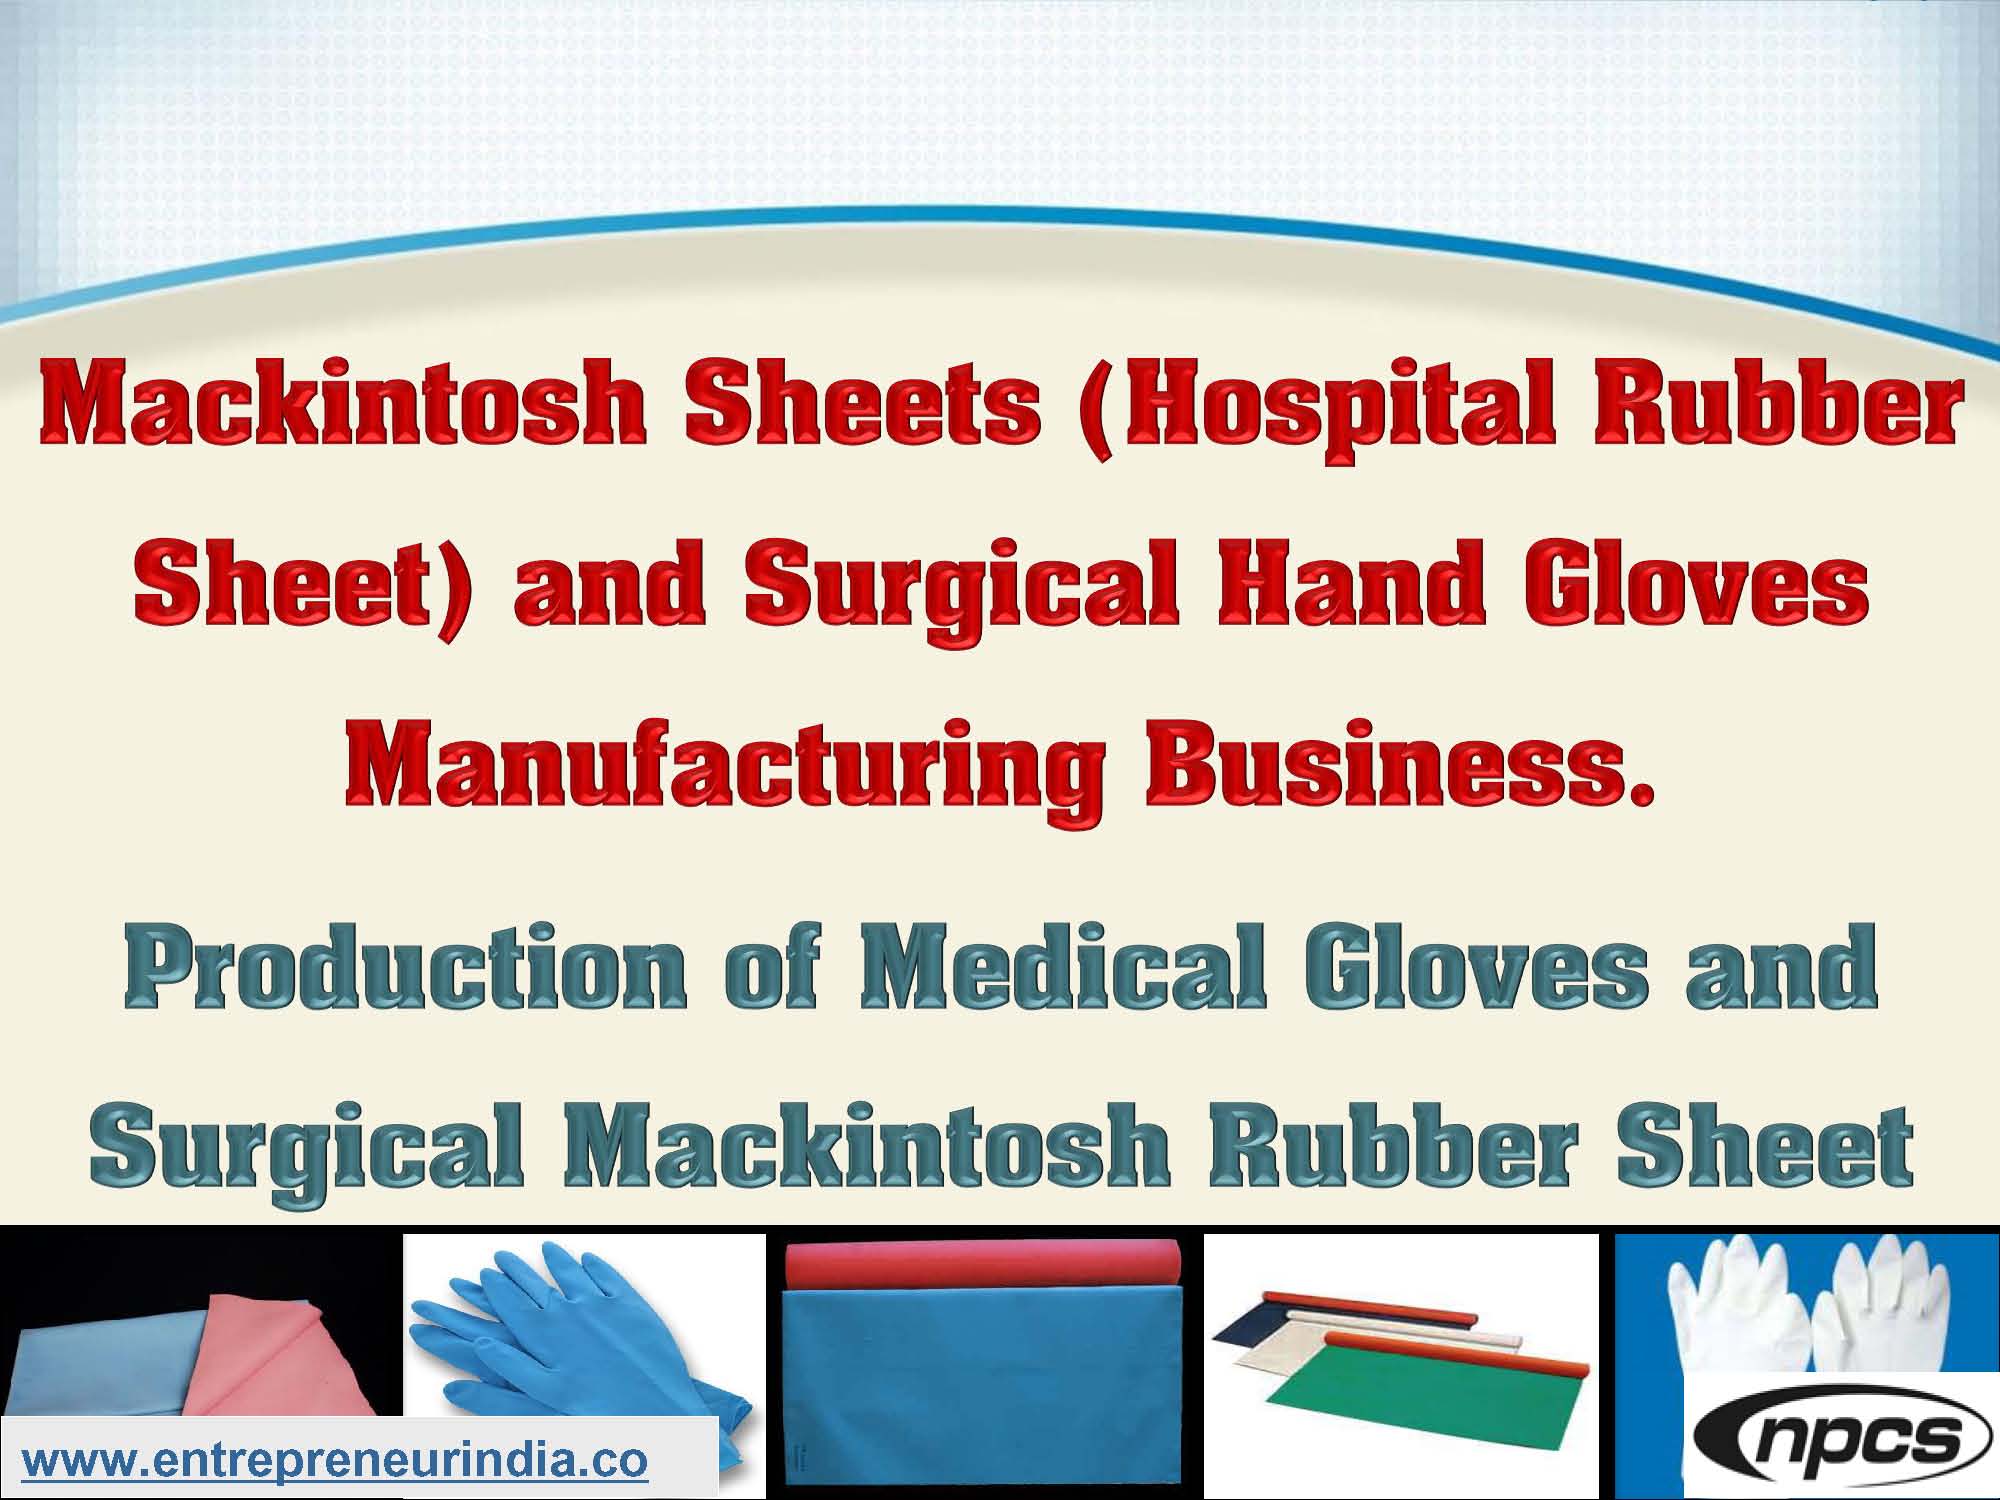 Mackintosh Sheets (Hospital Rubber Sheet) and Surgical Hand Gloves Manufacturing Business